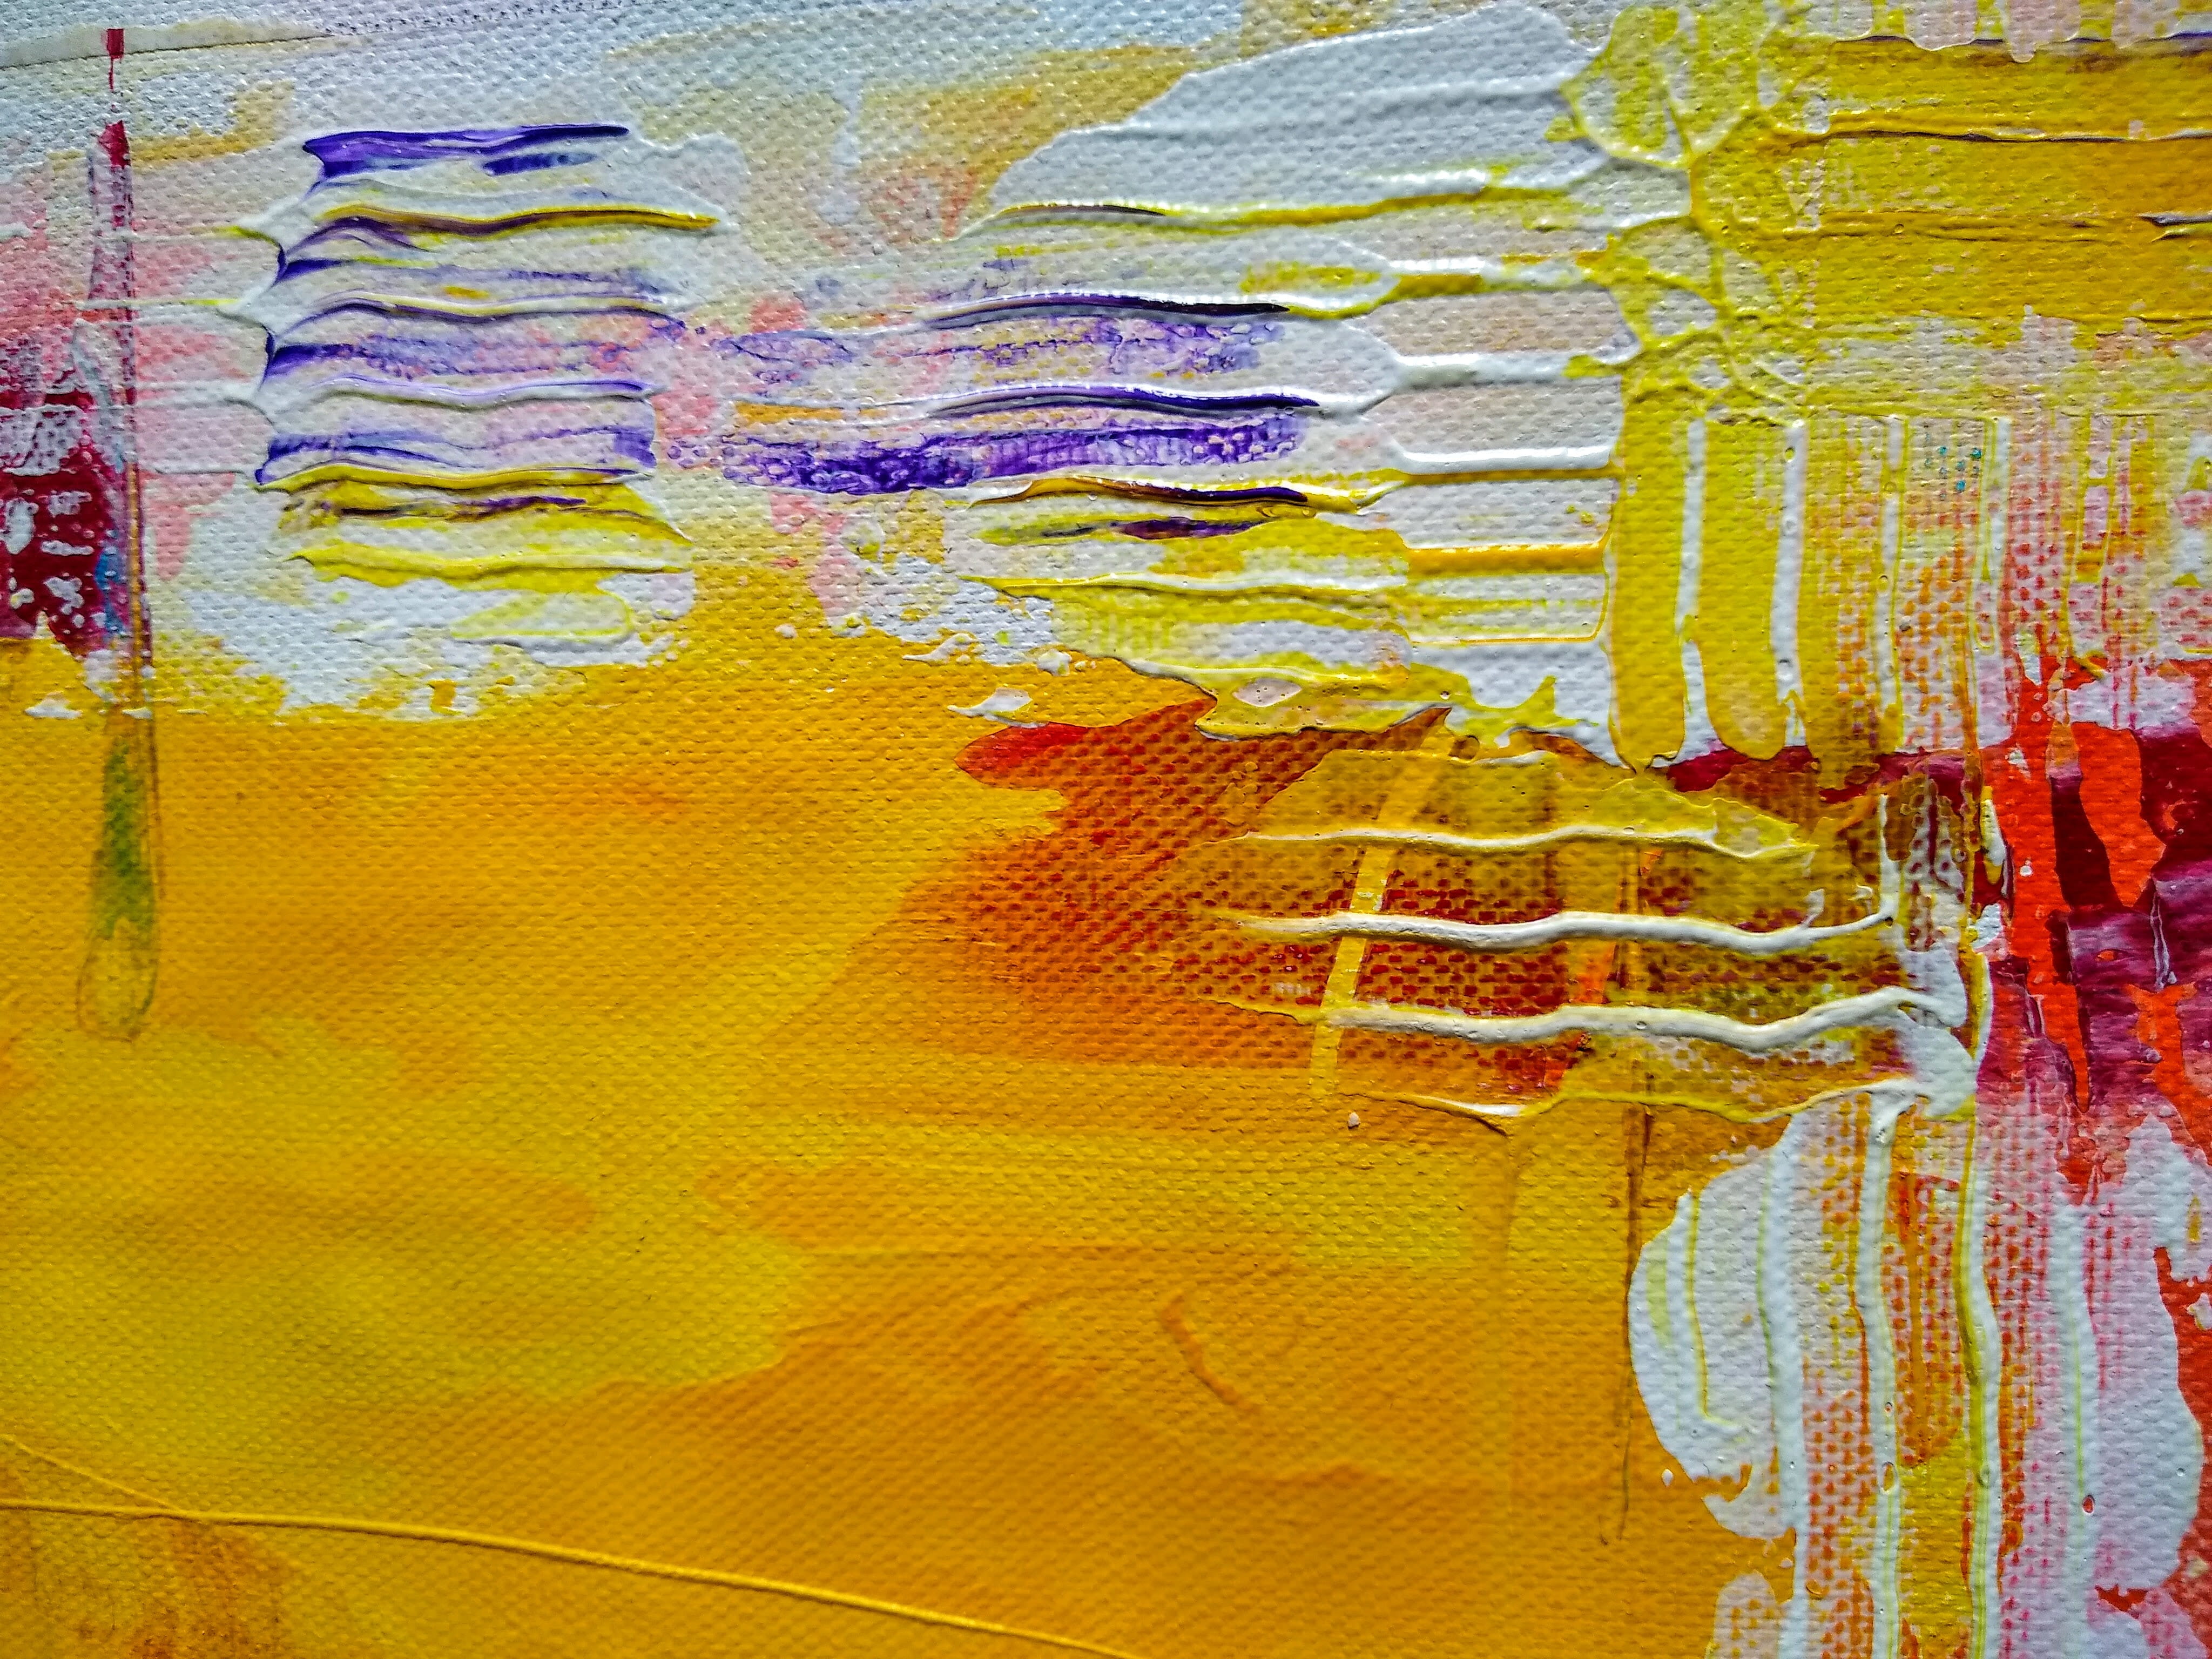 A painting. It is textured, yellow, red, white and purple.